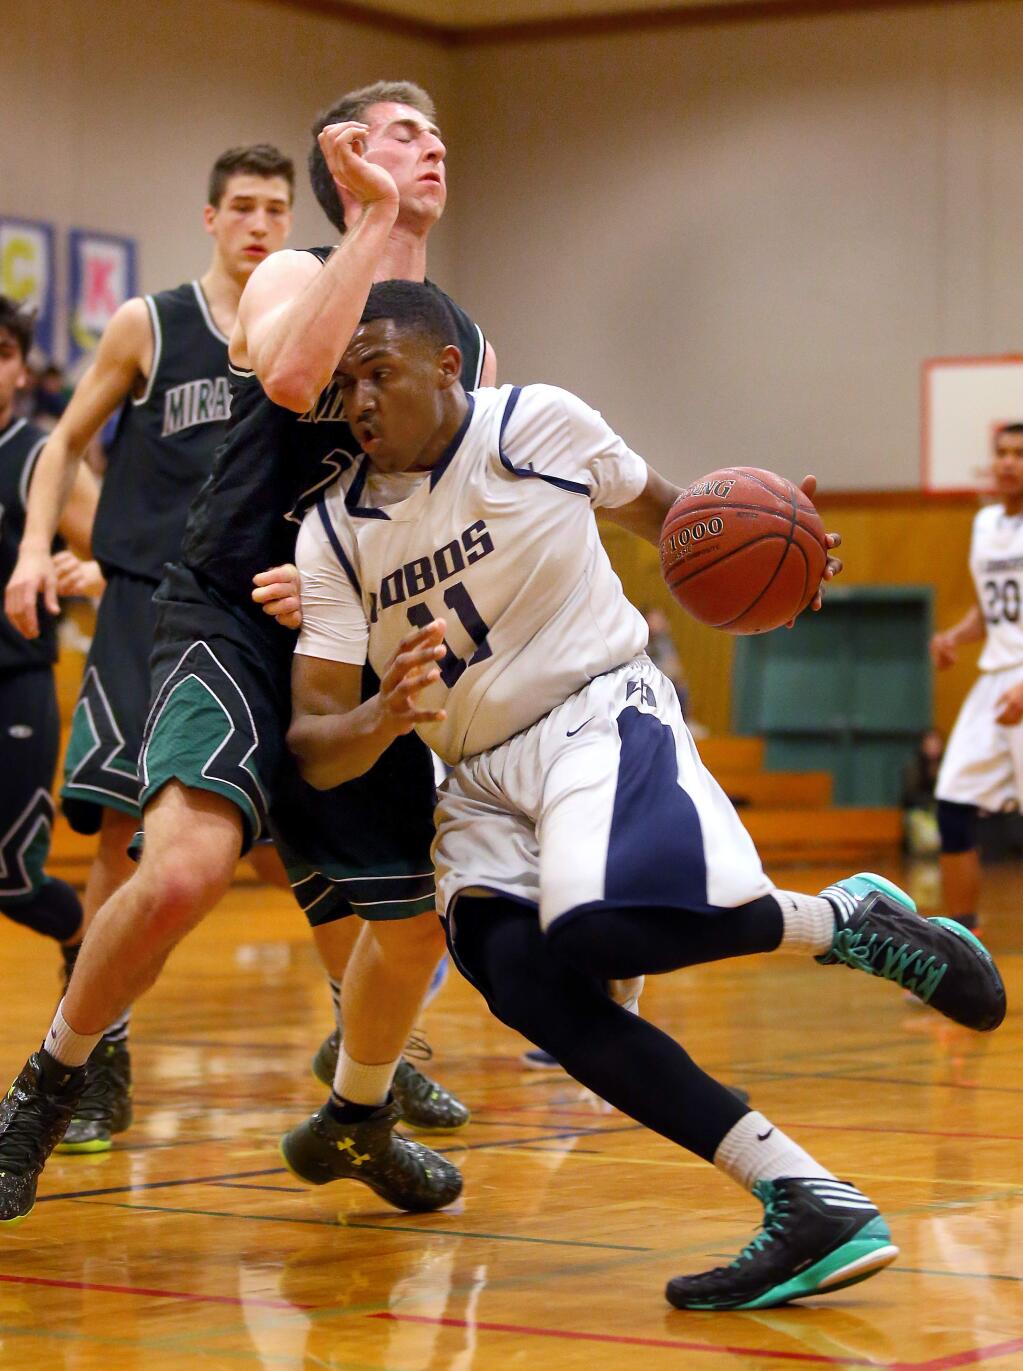 Elsie Allen's Jalen Busby is fouled by Miramonte's Jackson Wegener as he drives to the basket during their game in Santa Rosa on Tuesday, February 24, 2015. (Christopher Chung/ The Press Democrat)